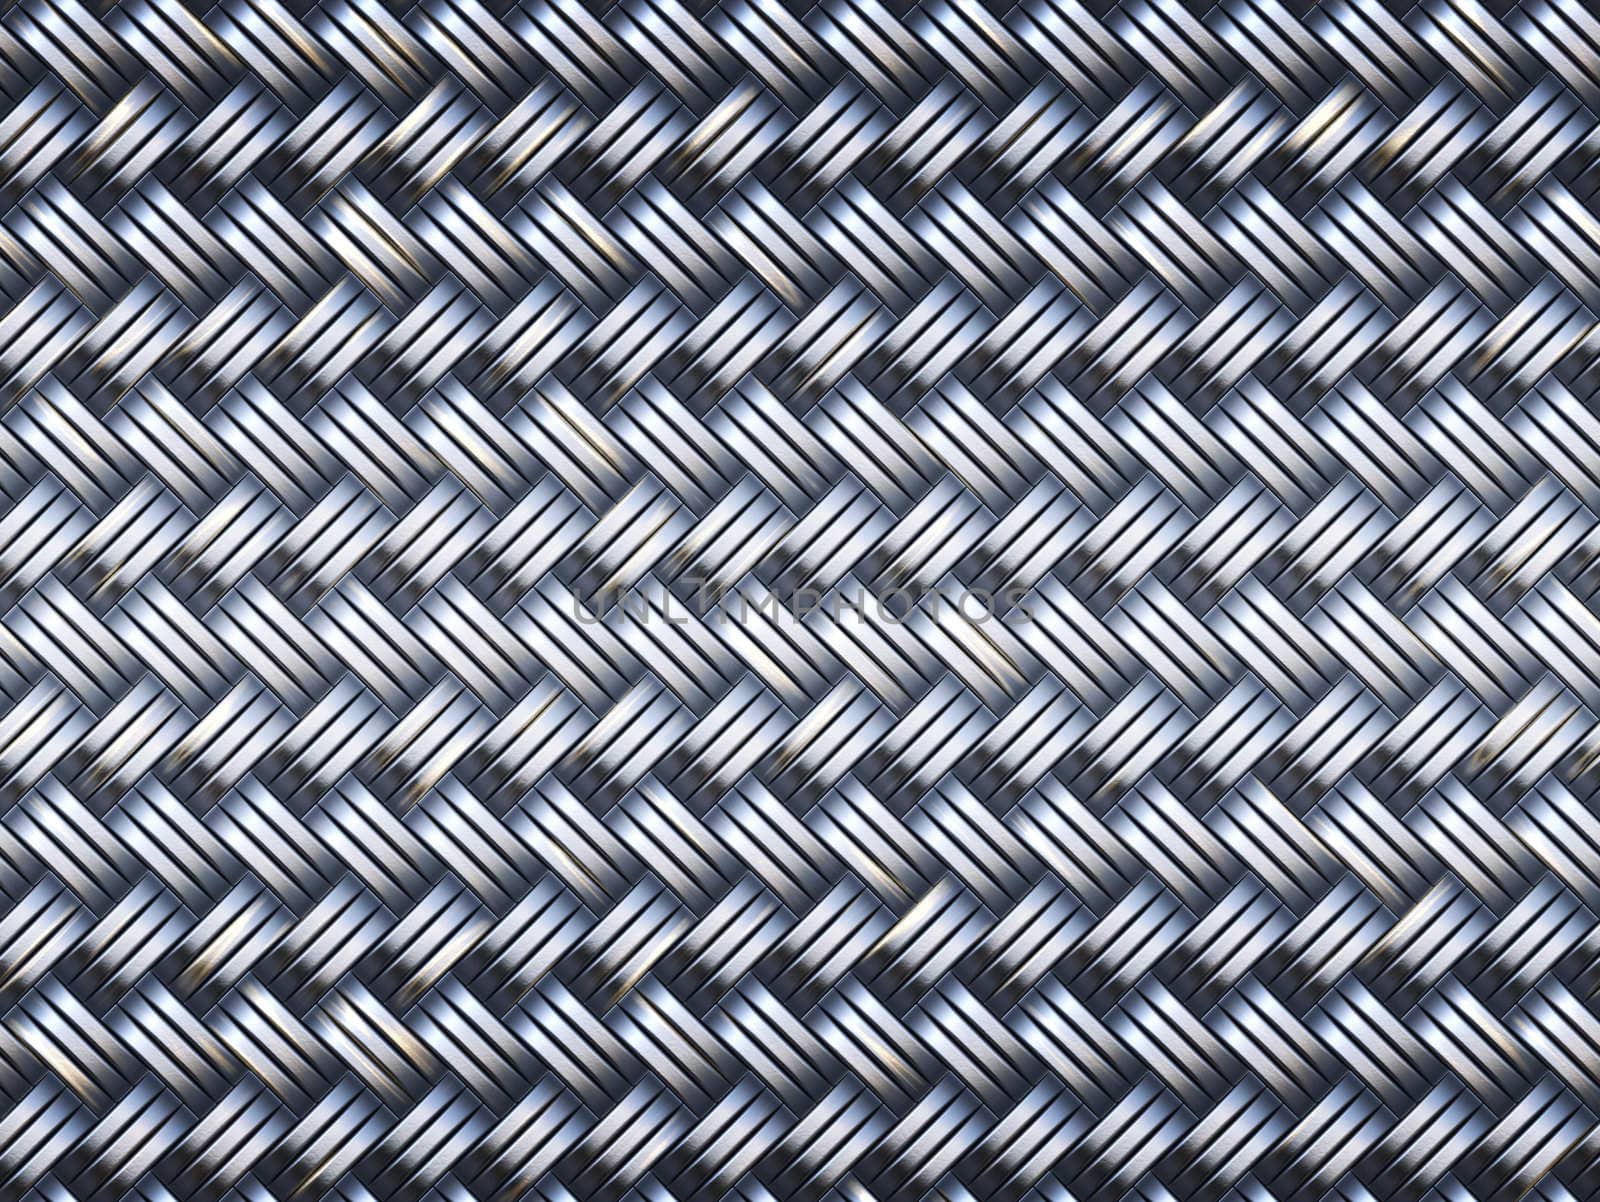 woven metal by clearviewstock